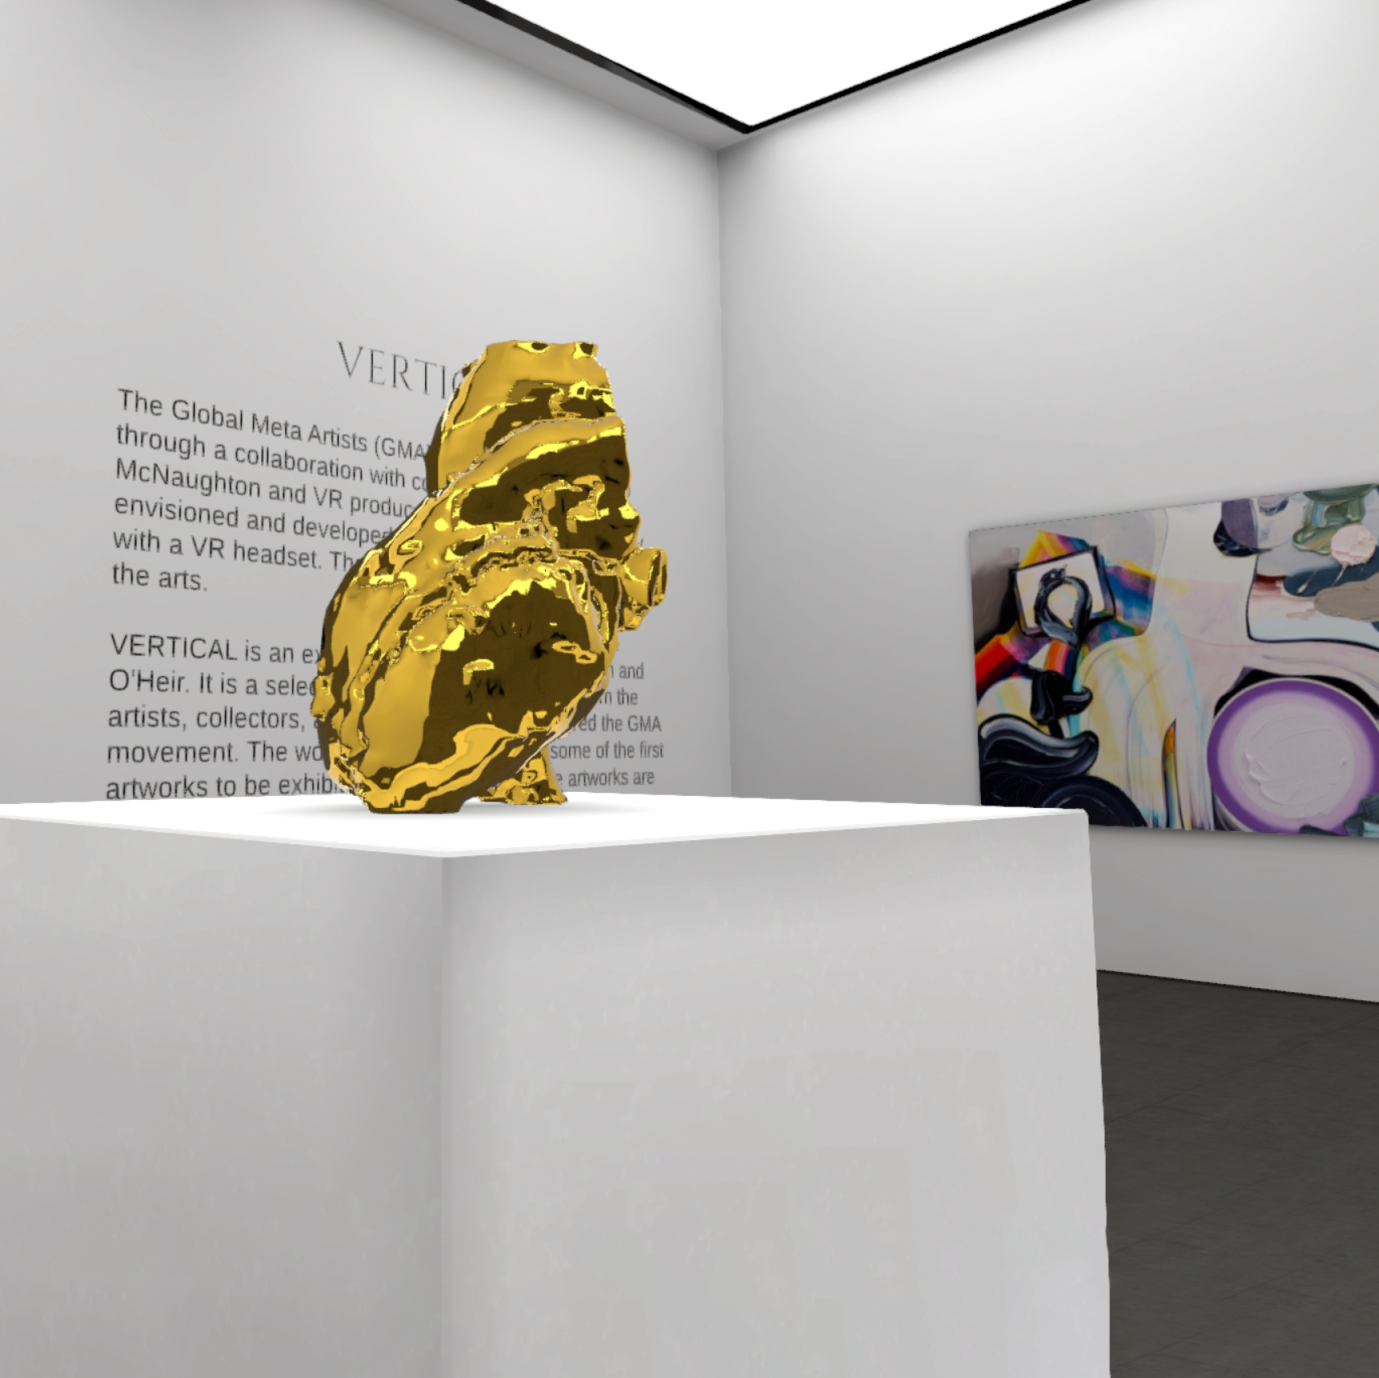 Art Gate VR sculpture private collection exhibition view